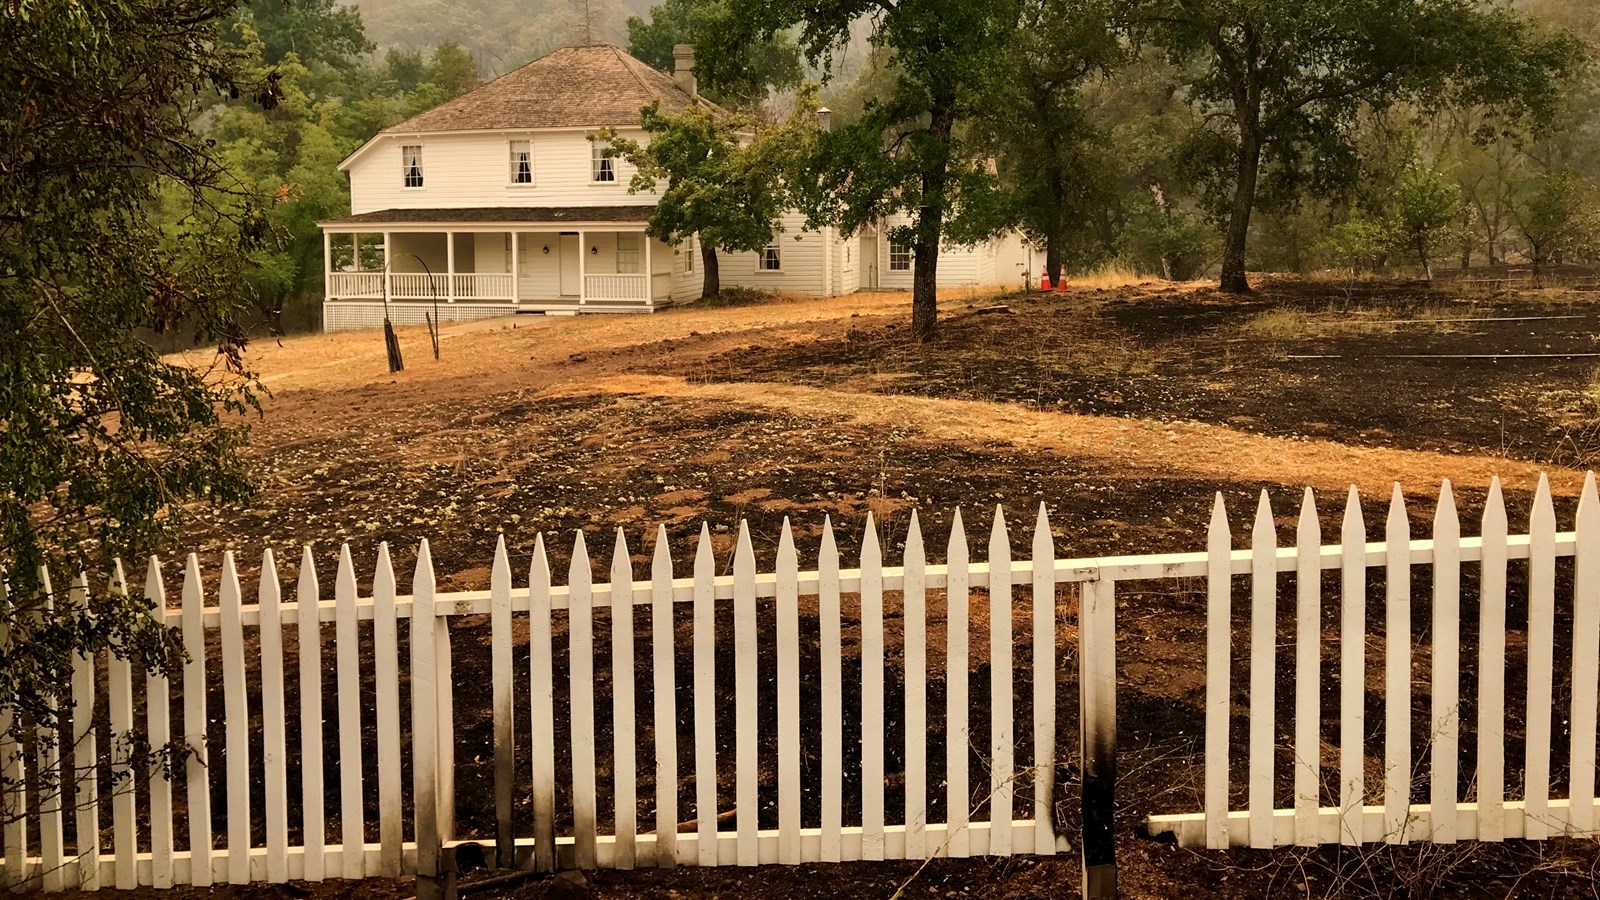 The 2018 Carr Fire burned through much of the area, but the historic Camden House itself was saved.